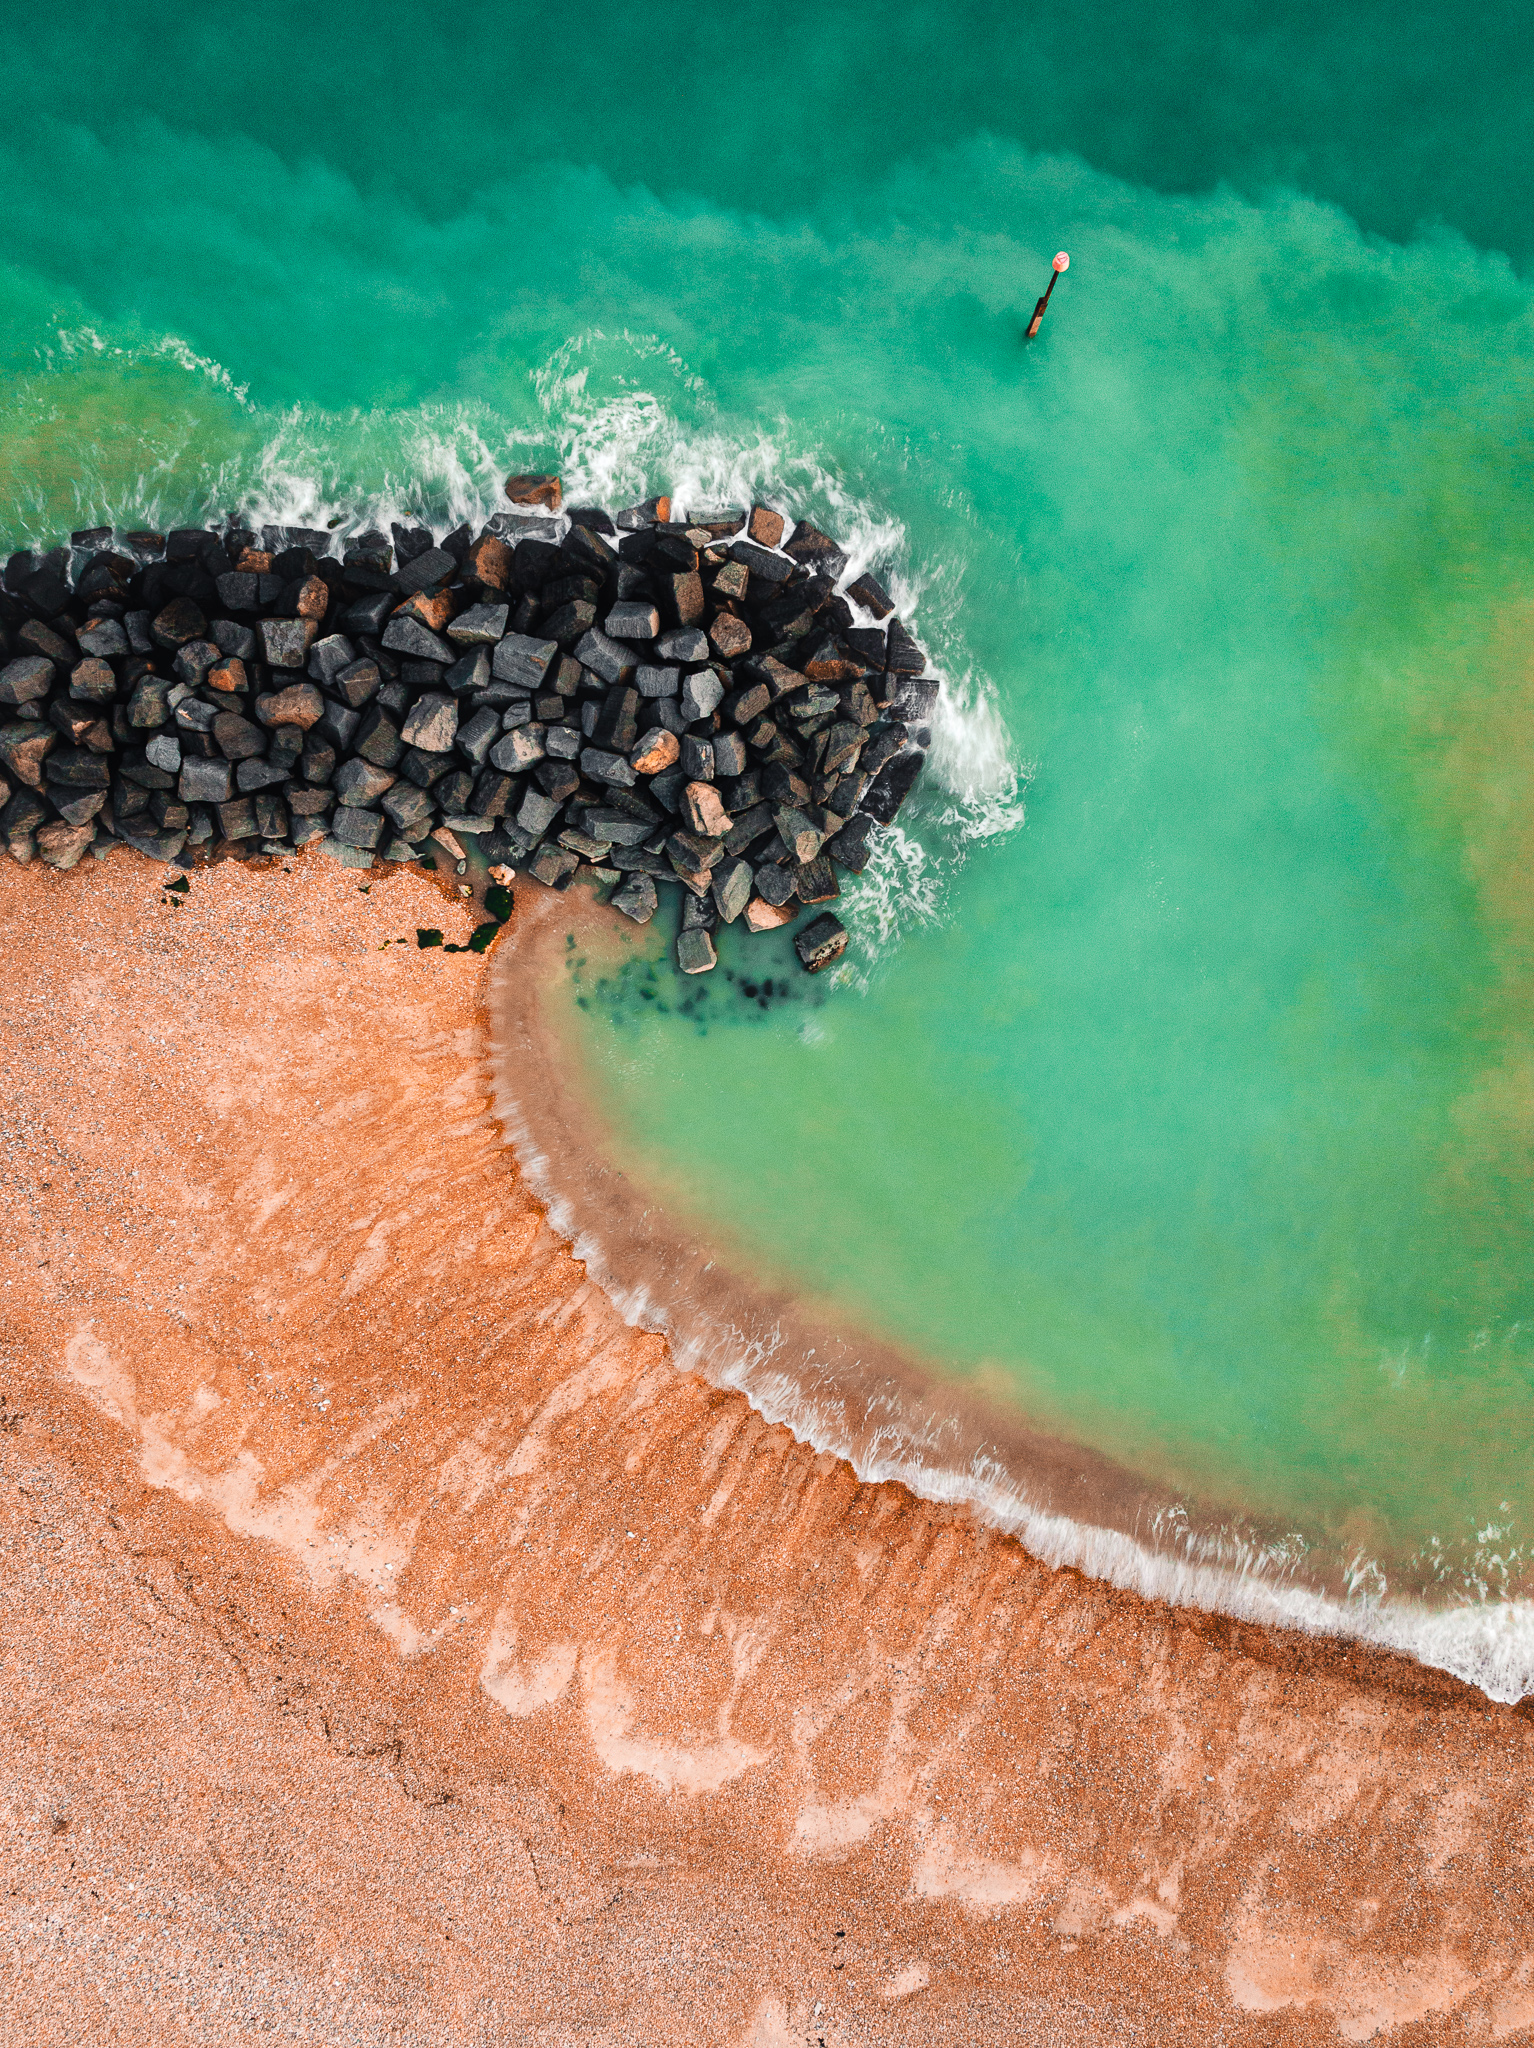 Top down view of a teal green water washing over a wave breaker made of large dark rocks with a orange pebble beach behind it